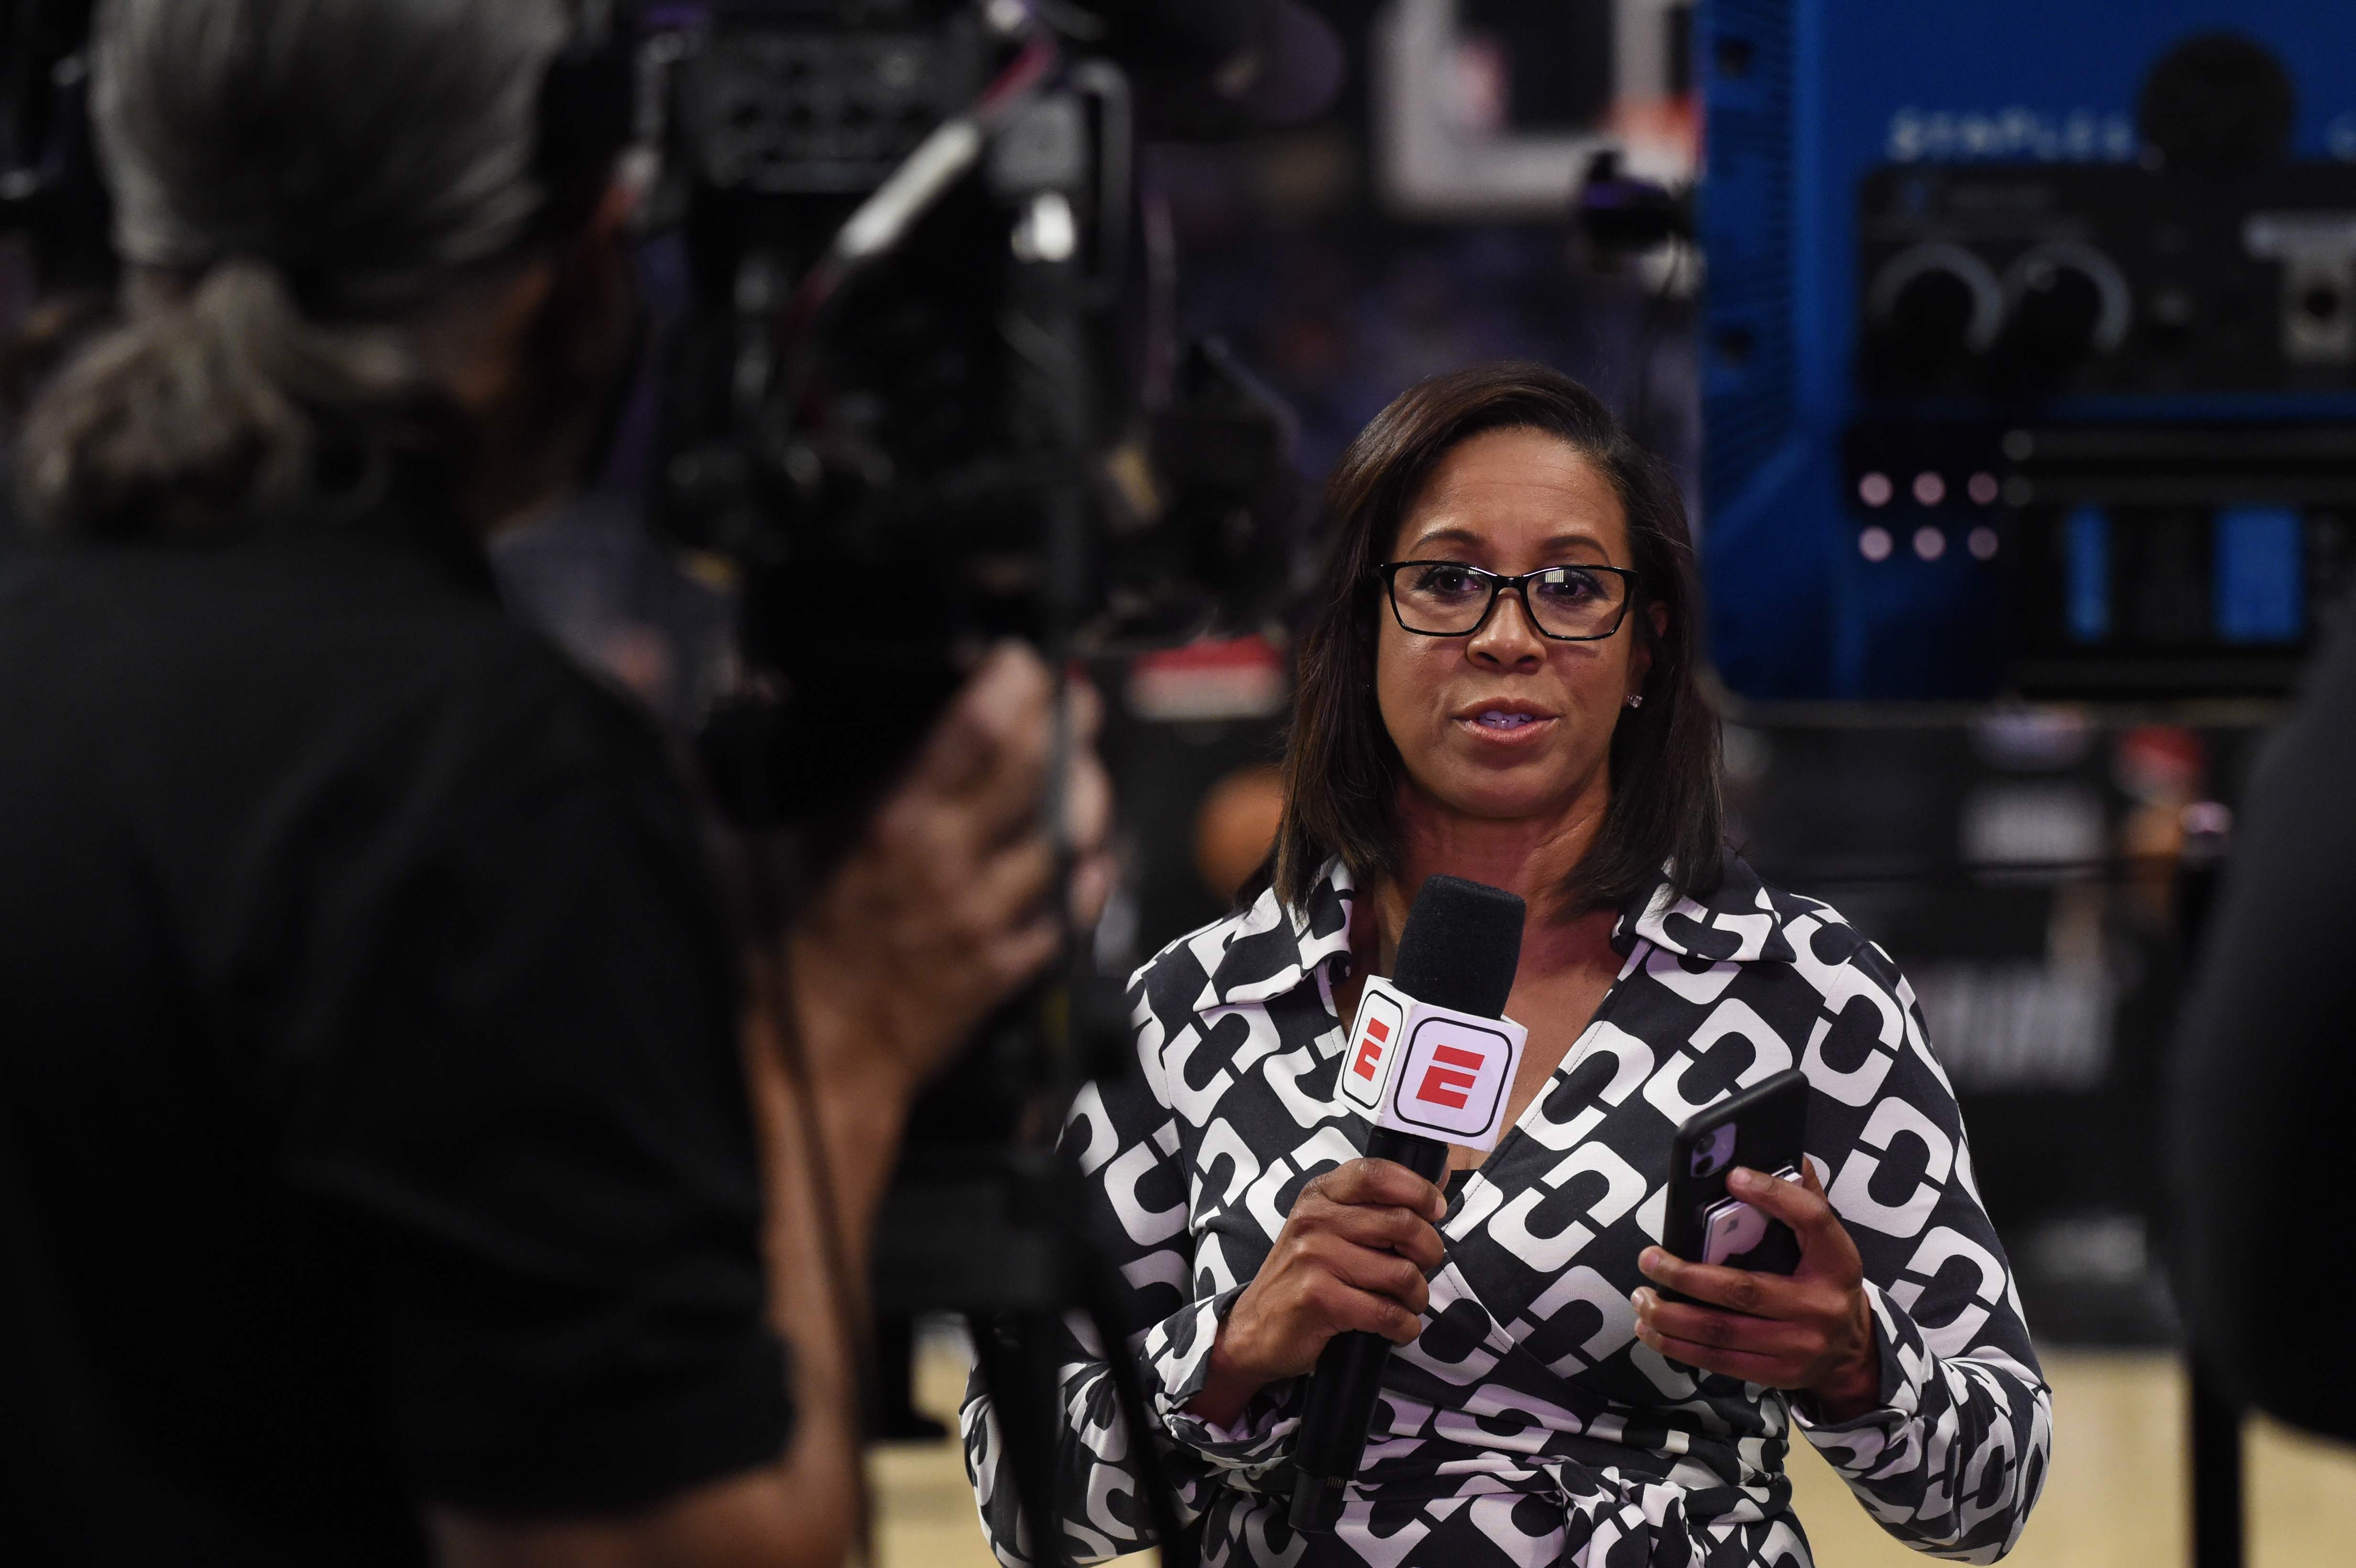 ESPN Reporter, Lisa Salters reports on the game between the Utah Jazz and LA Clippers during Round 2, Game 3 of the 2021 NBA Playoffs on June 12, 2021 at STAPLES Center in Los Angeles, California.